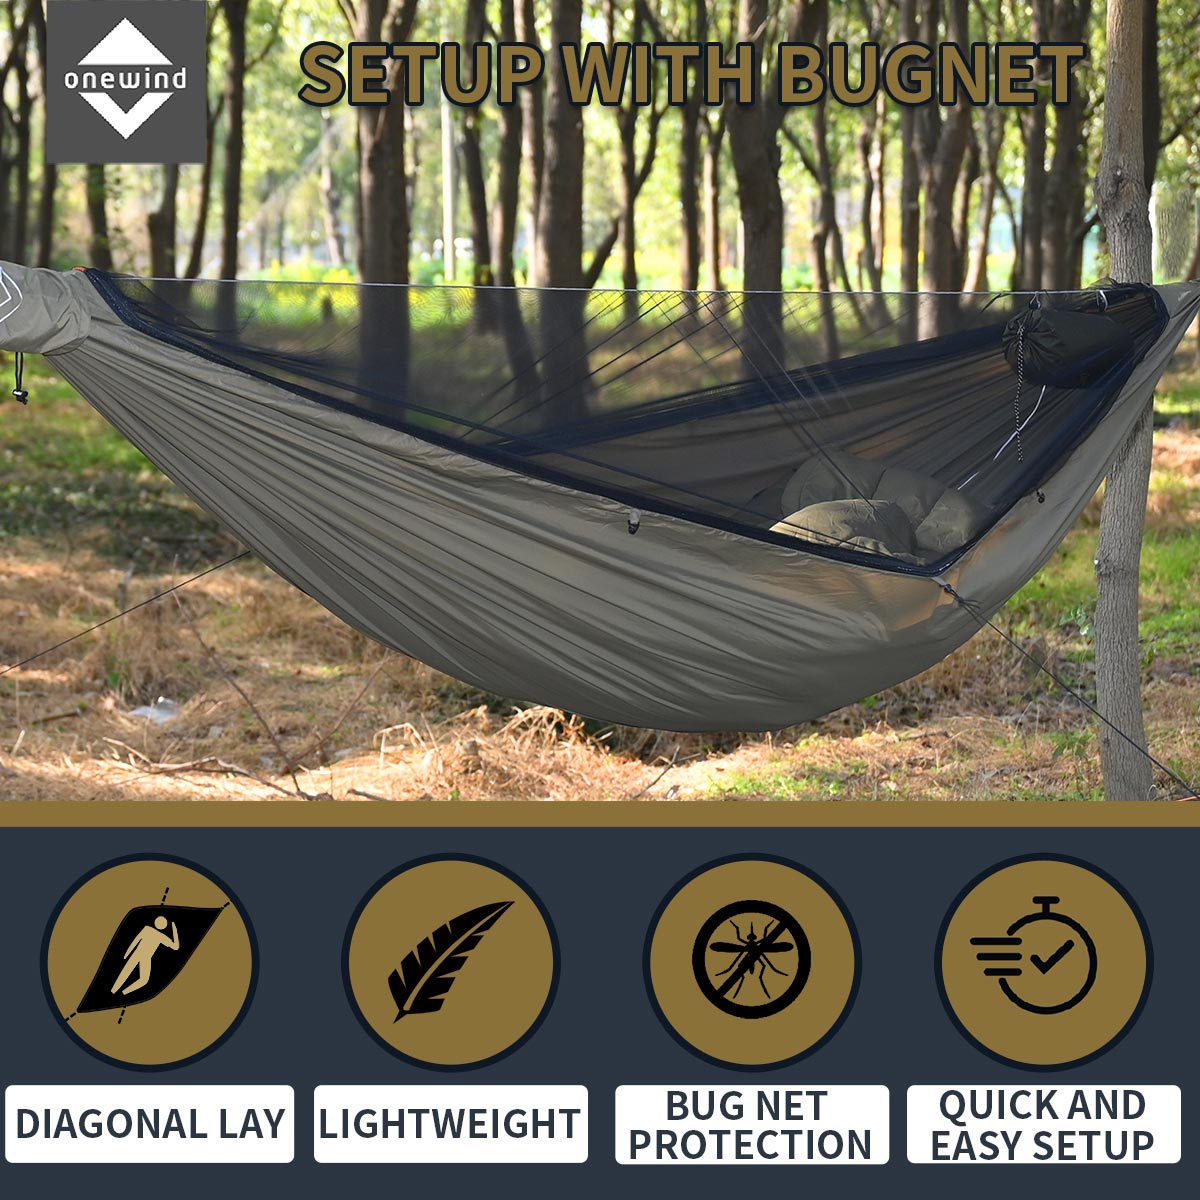 Airstream Camping Hammock Features | Onewind Outdoors